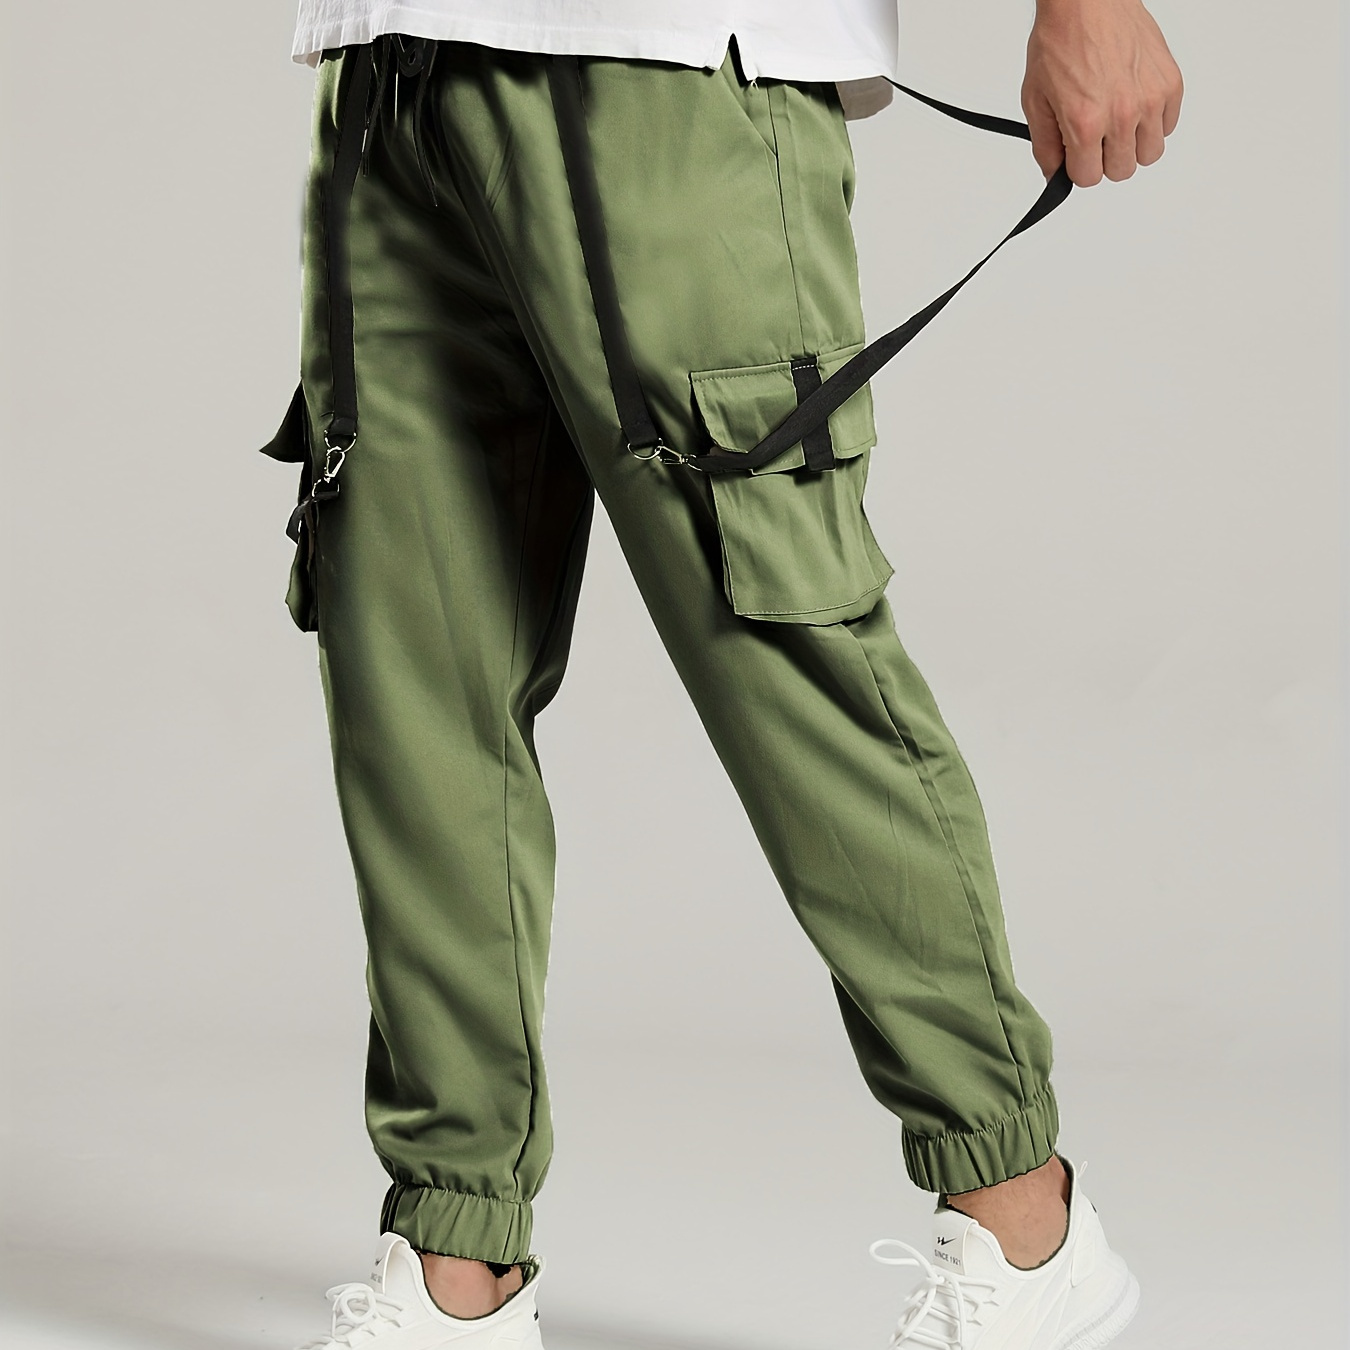 

Plus Size Men's Colorblock Cargo Pants, Casual Drawstring Waist Sporty Pants With Pockets, For Outdoor Activities